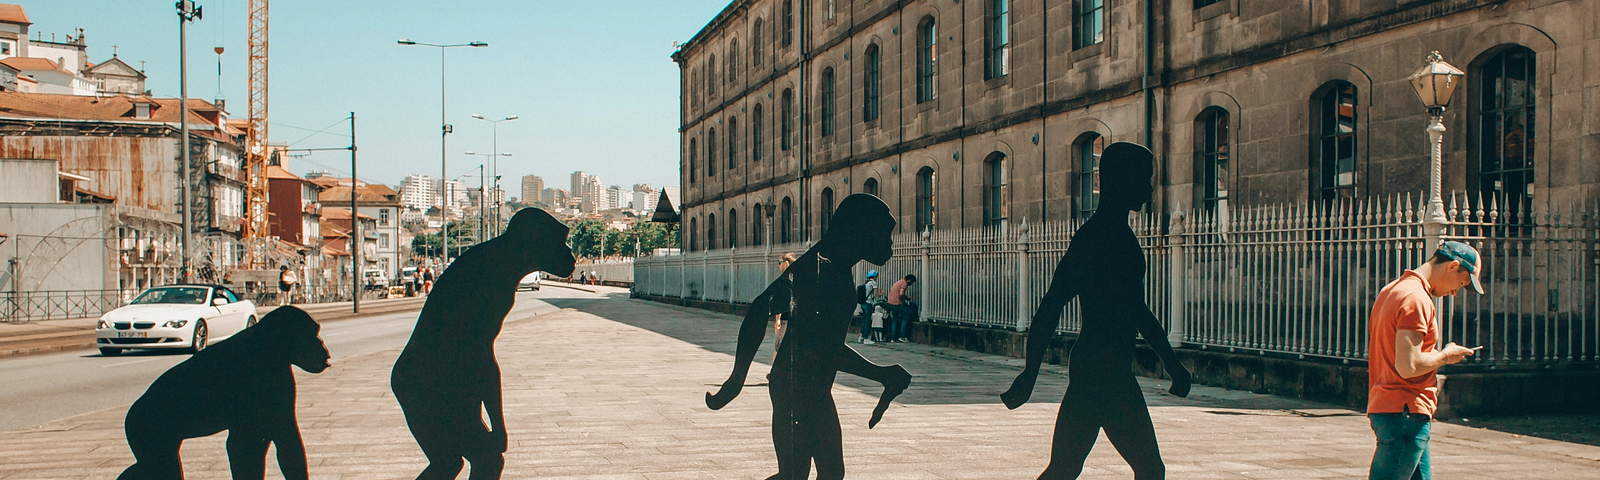 An art installation of four black metal silhouettes depicting hominid evolution, progressing from left to right, and a man dressed in blue jeans, a red t-shirt and a cap in the last position, looking down at his phone in his hand. The installation is in Porto, Portugal, on a sunny day, with a clear blue sky and tower cranes, apartment buildings, street lights and a car in the background to the left, and what looks to be a large old brick warehouse in the background on the right.